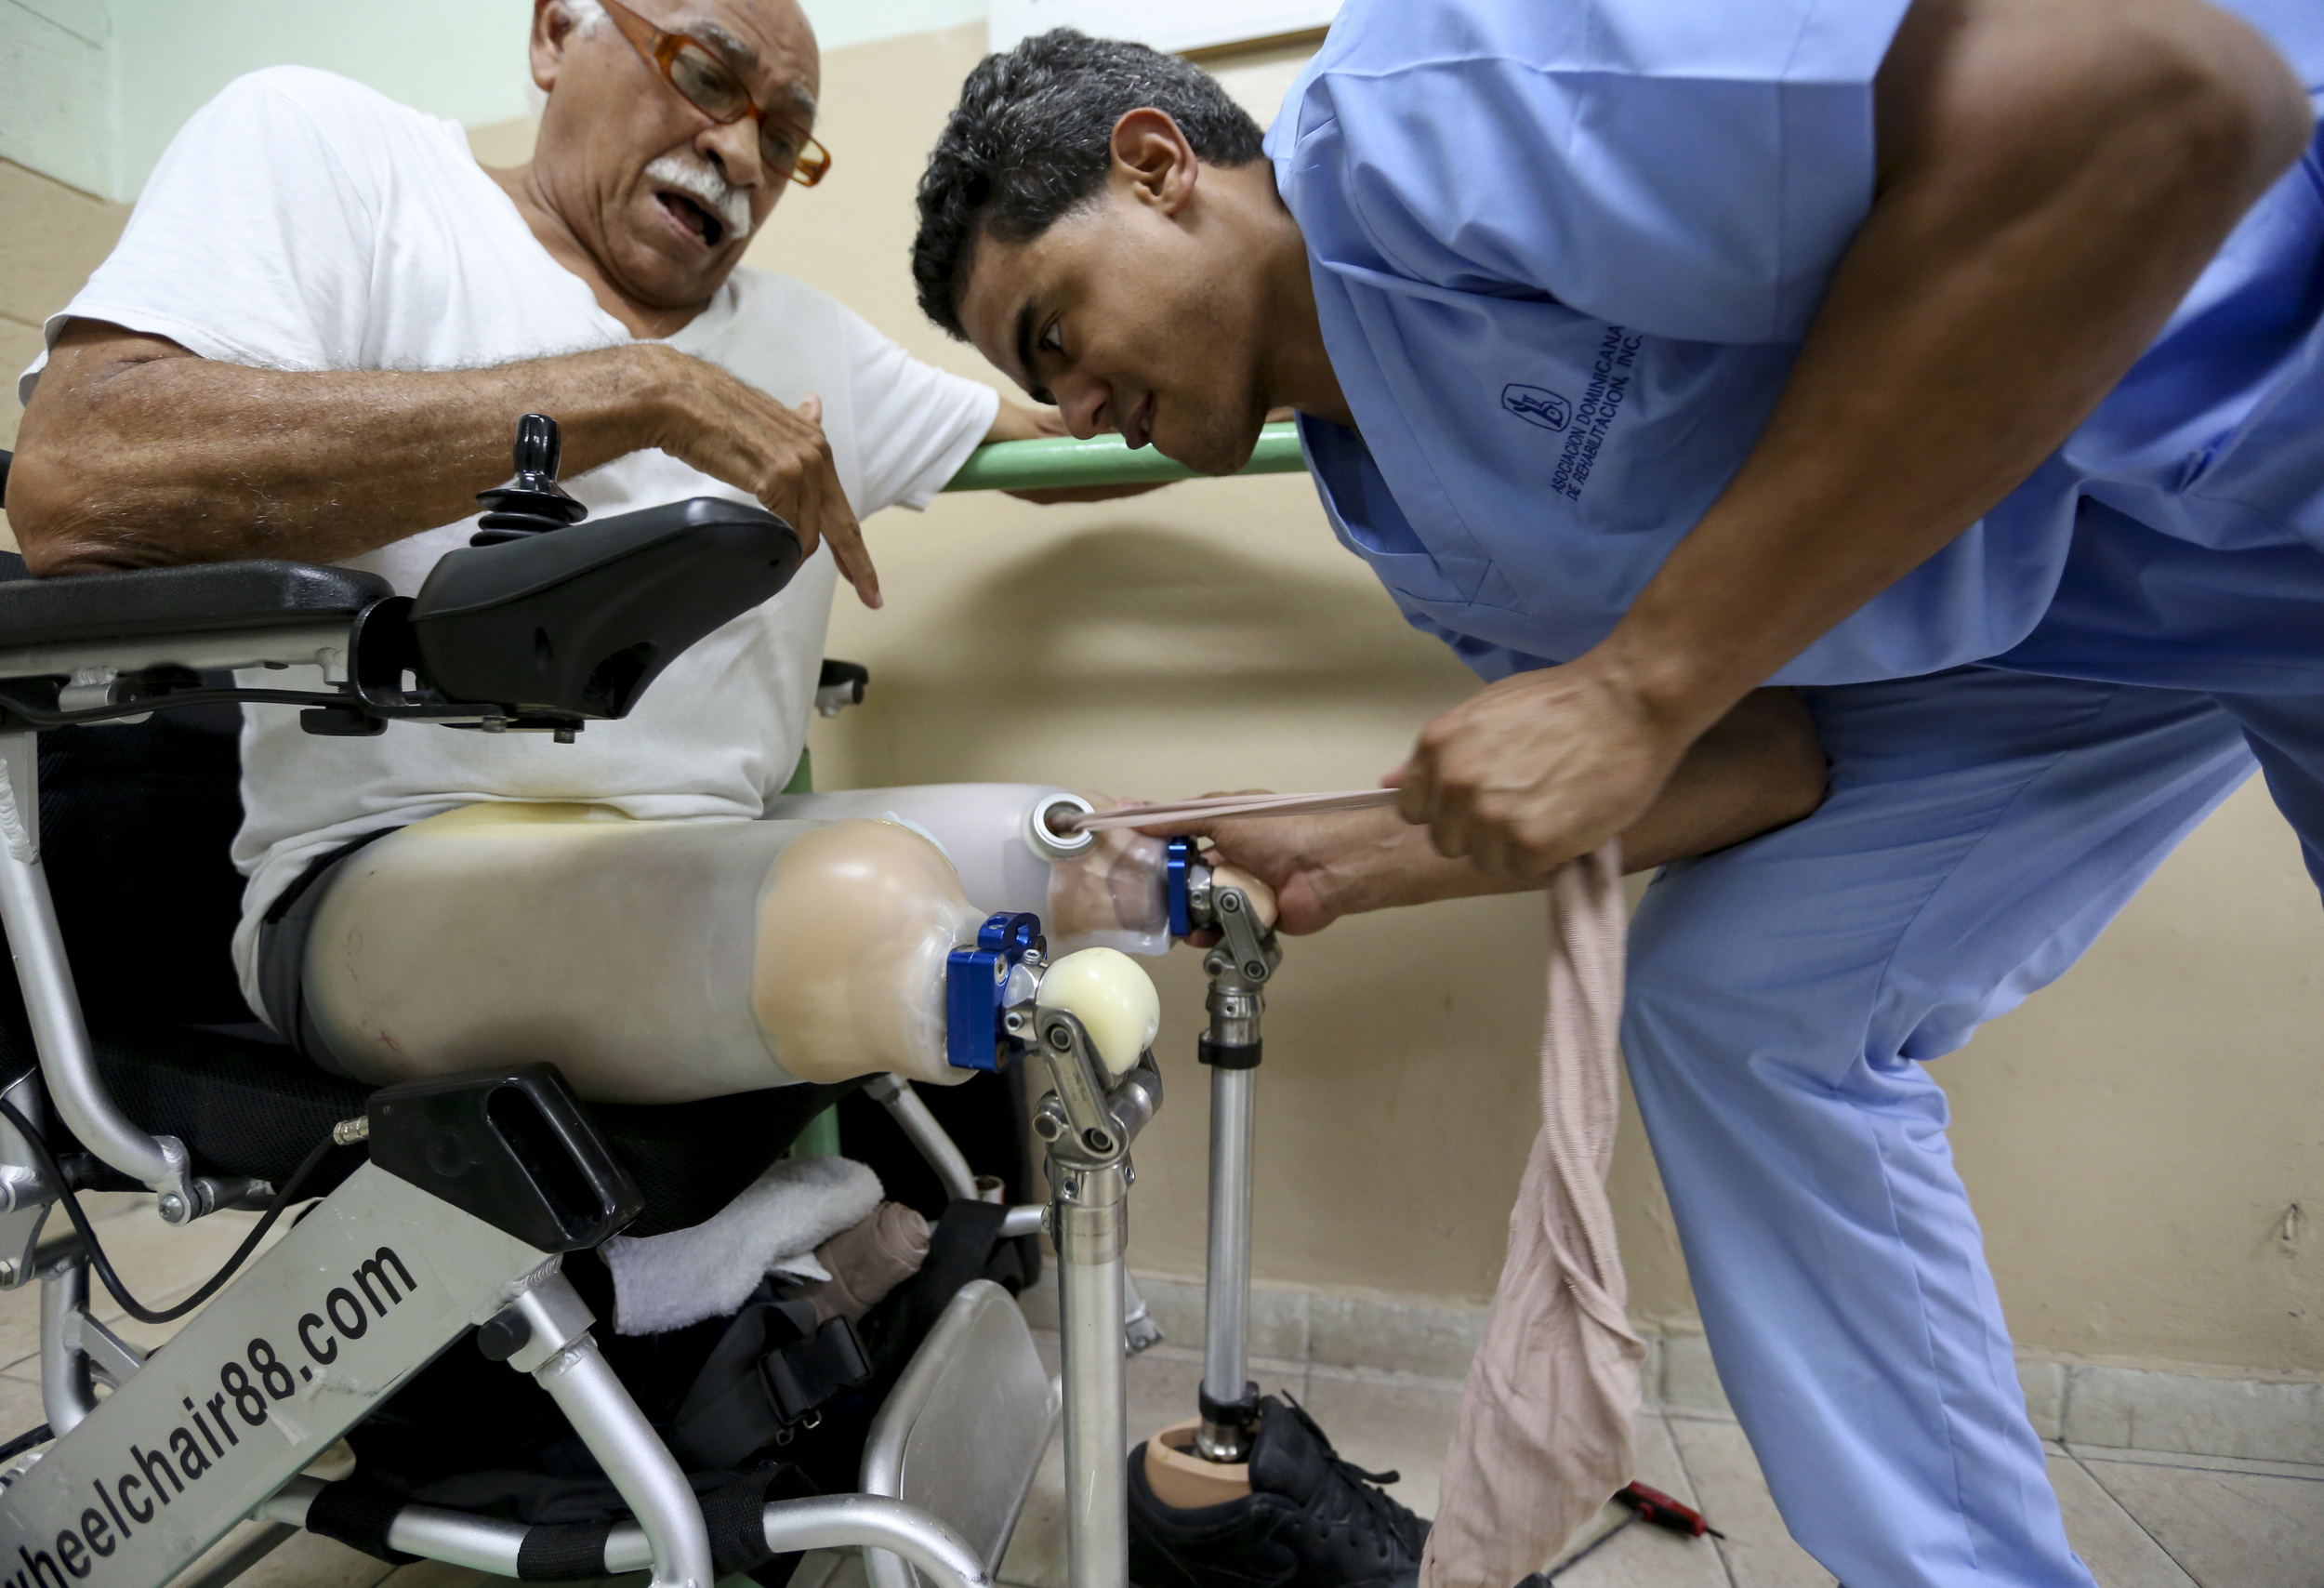  A double amputee gets his prosthetics fitted in Santo Domingo, Dominican Republic. 